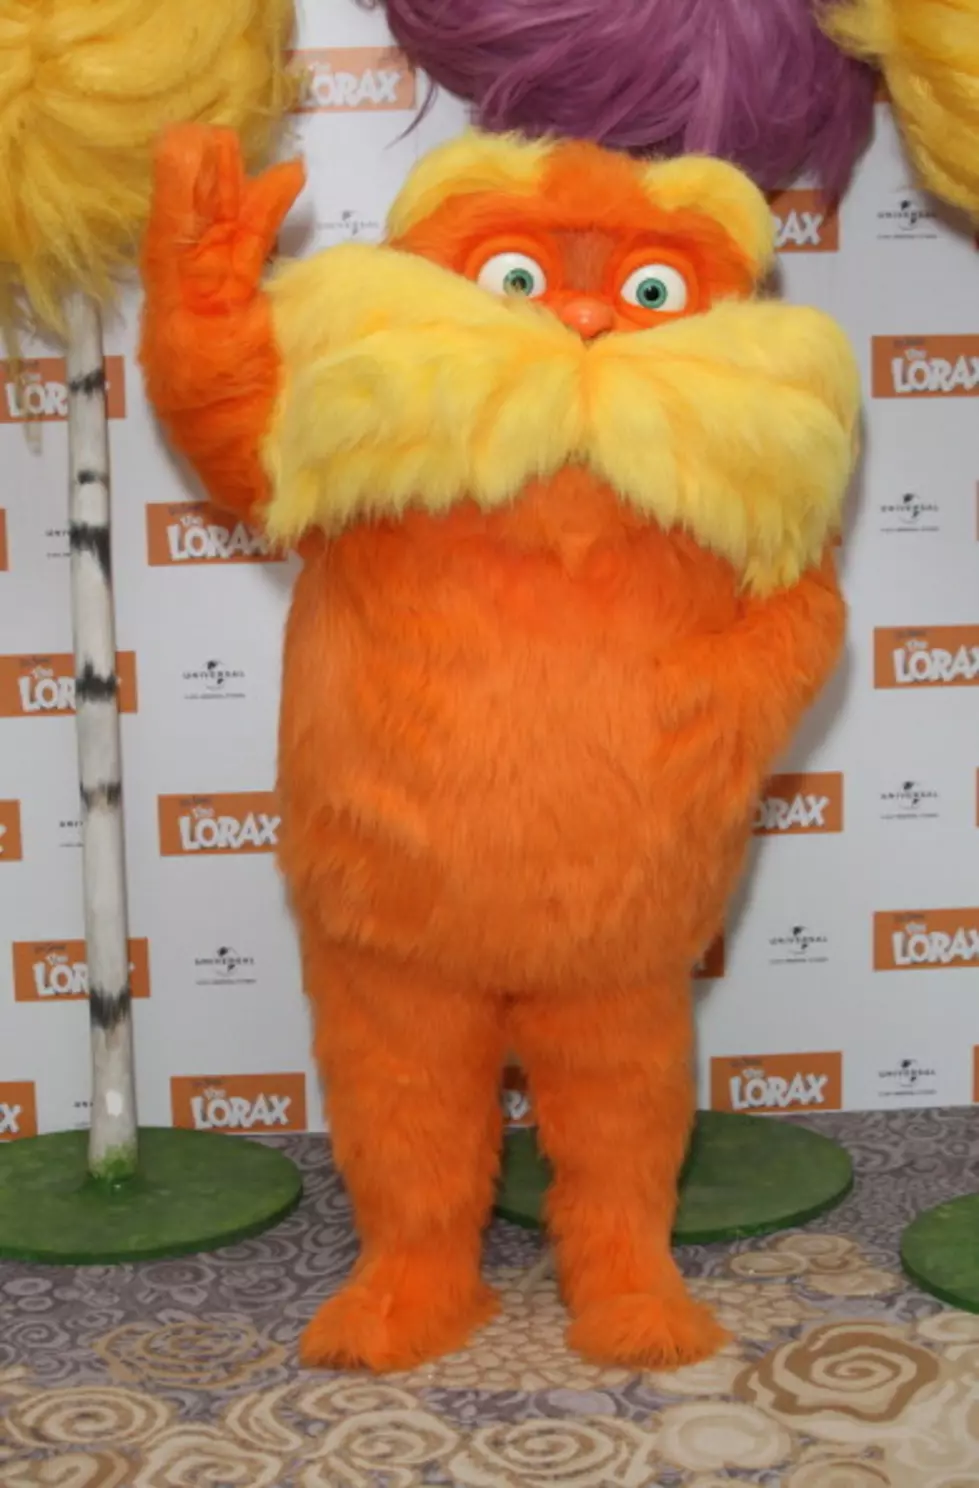 Make A Difference With Operation: Lorax In Cle Elum